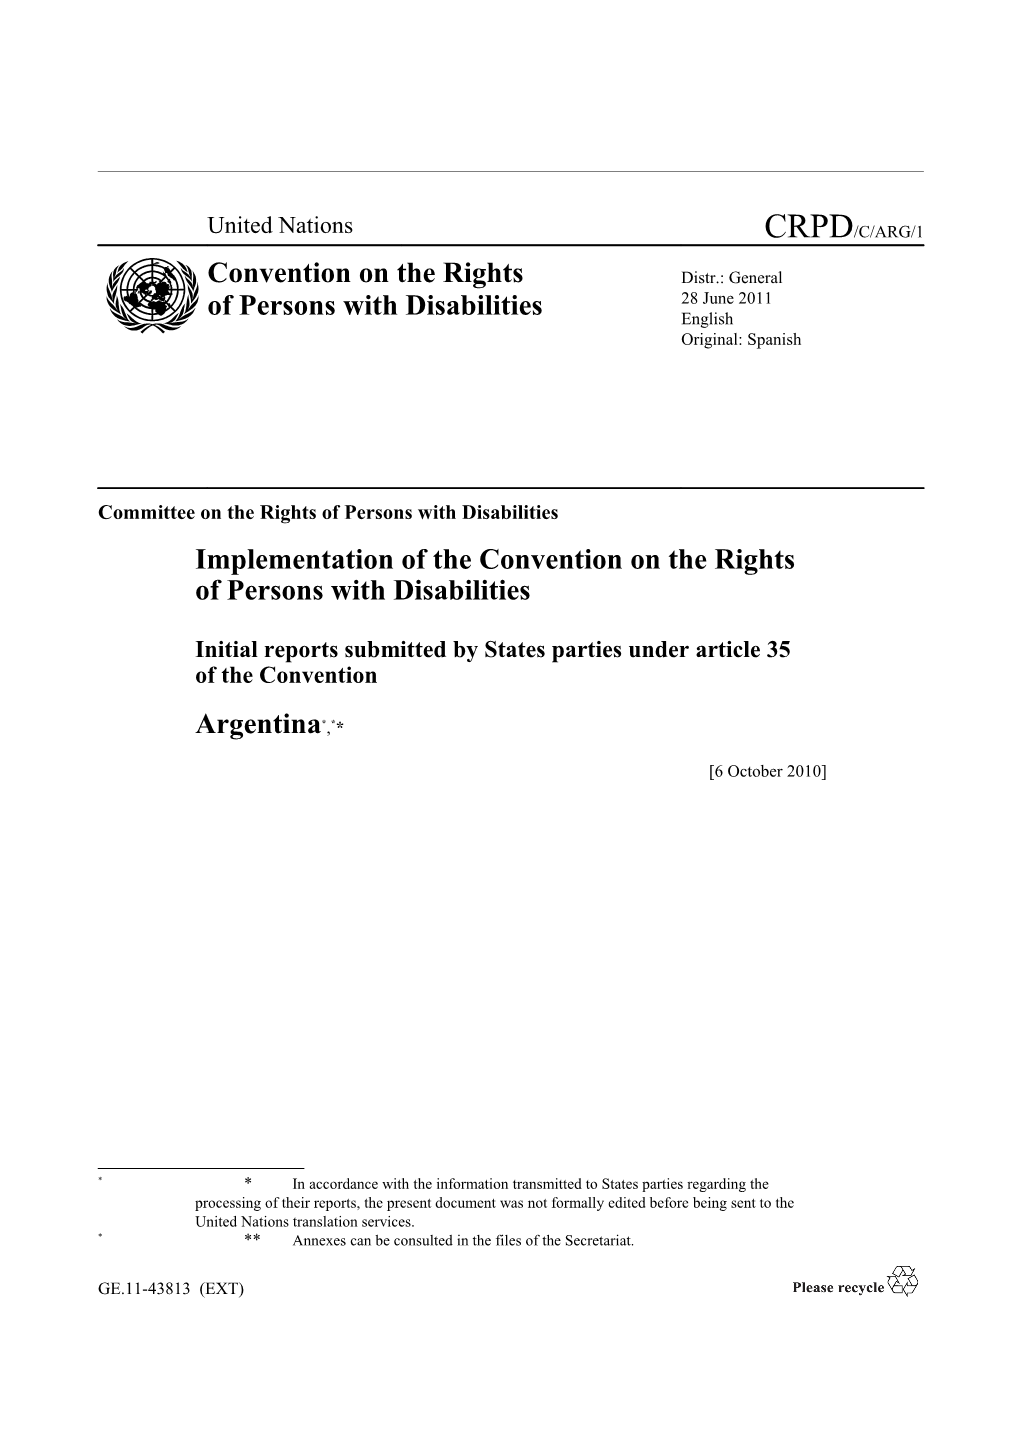 Committee on the Rights of Persons with Disabilities s6